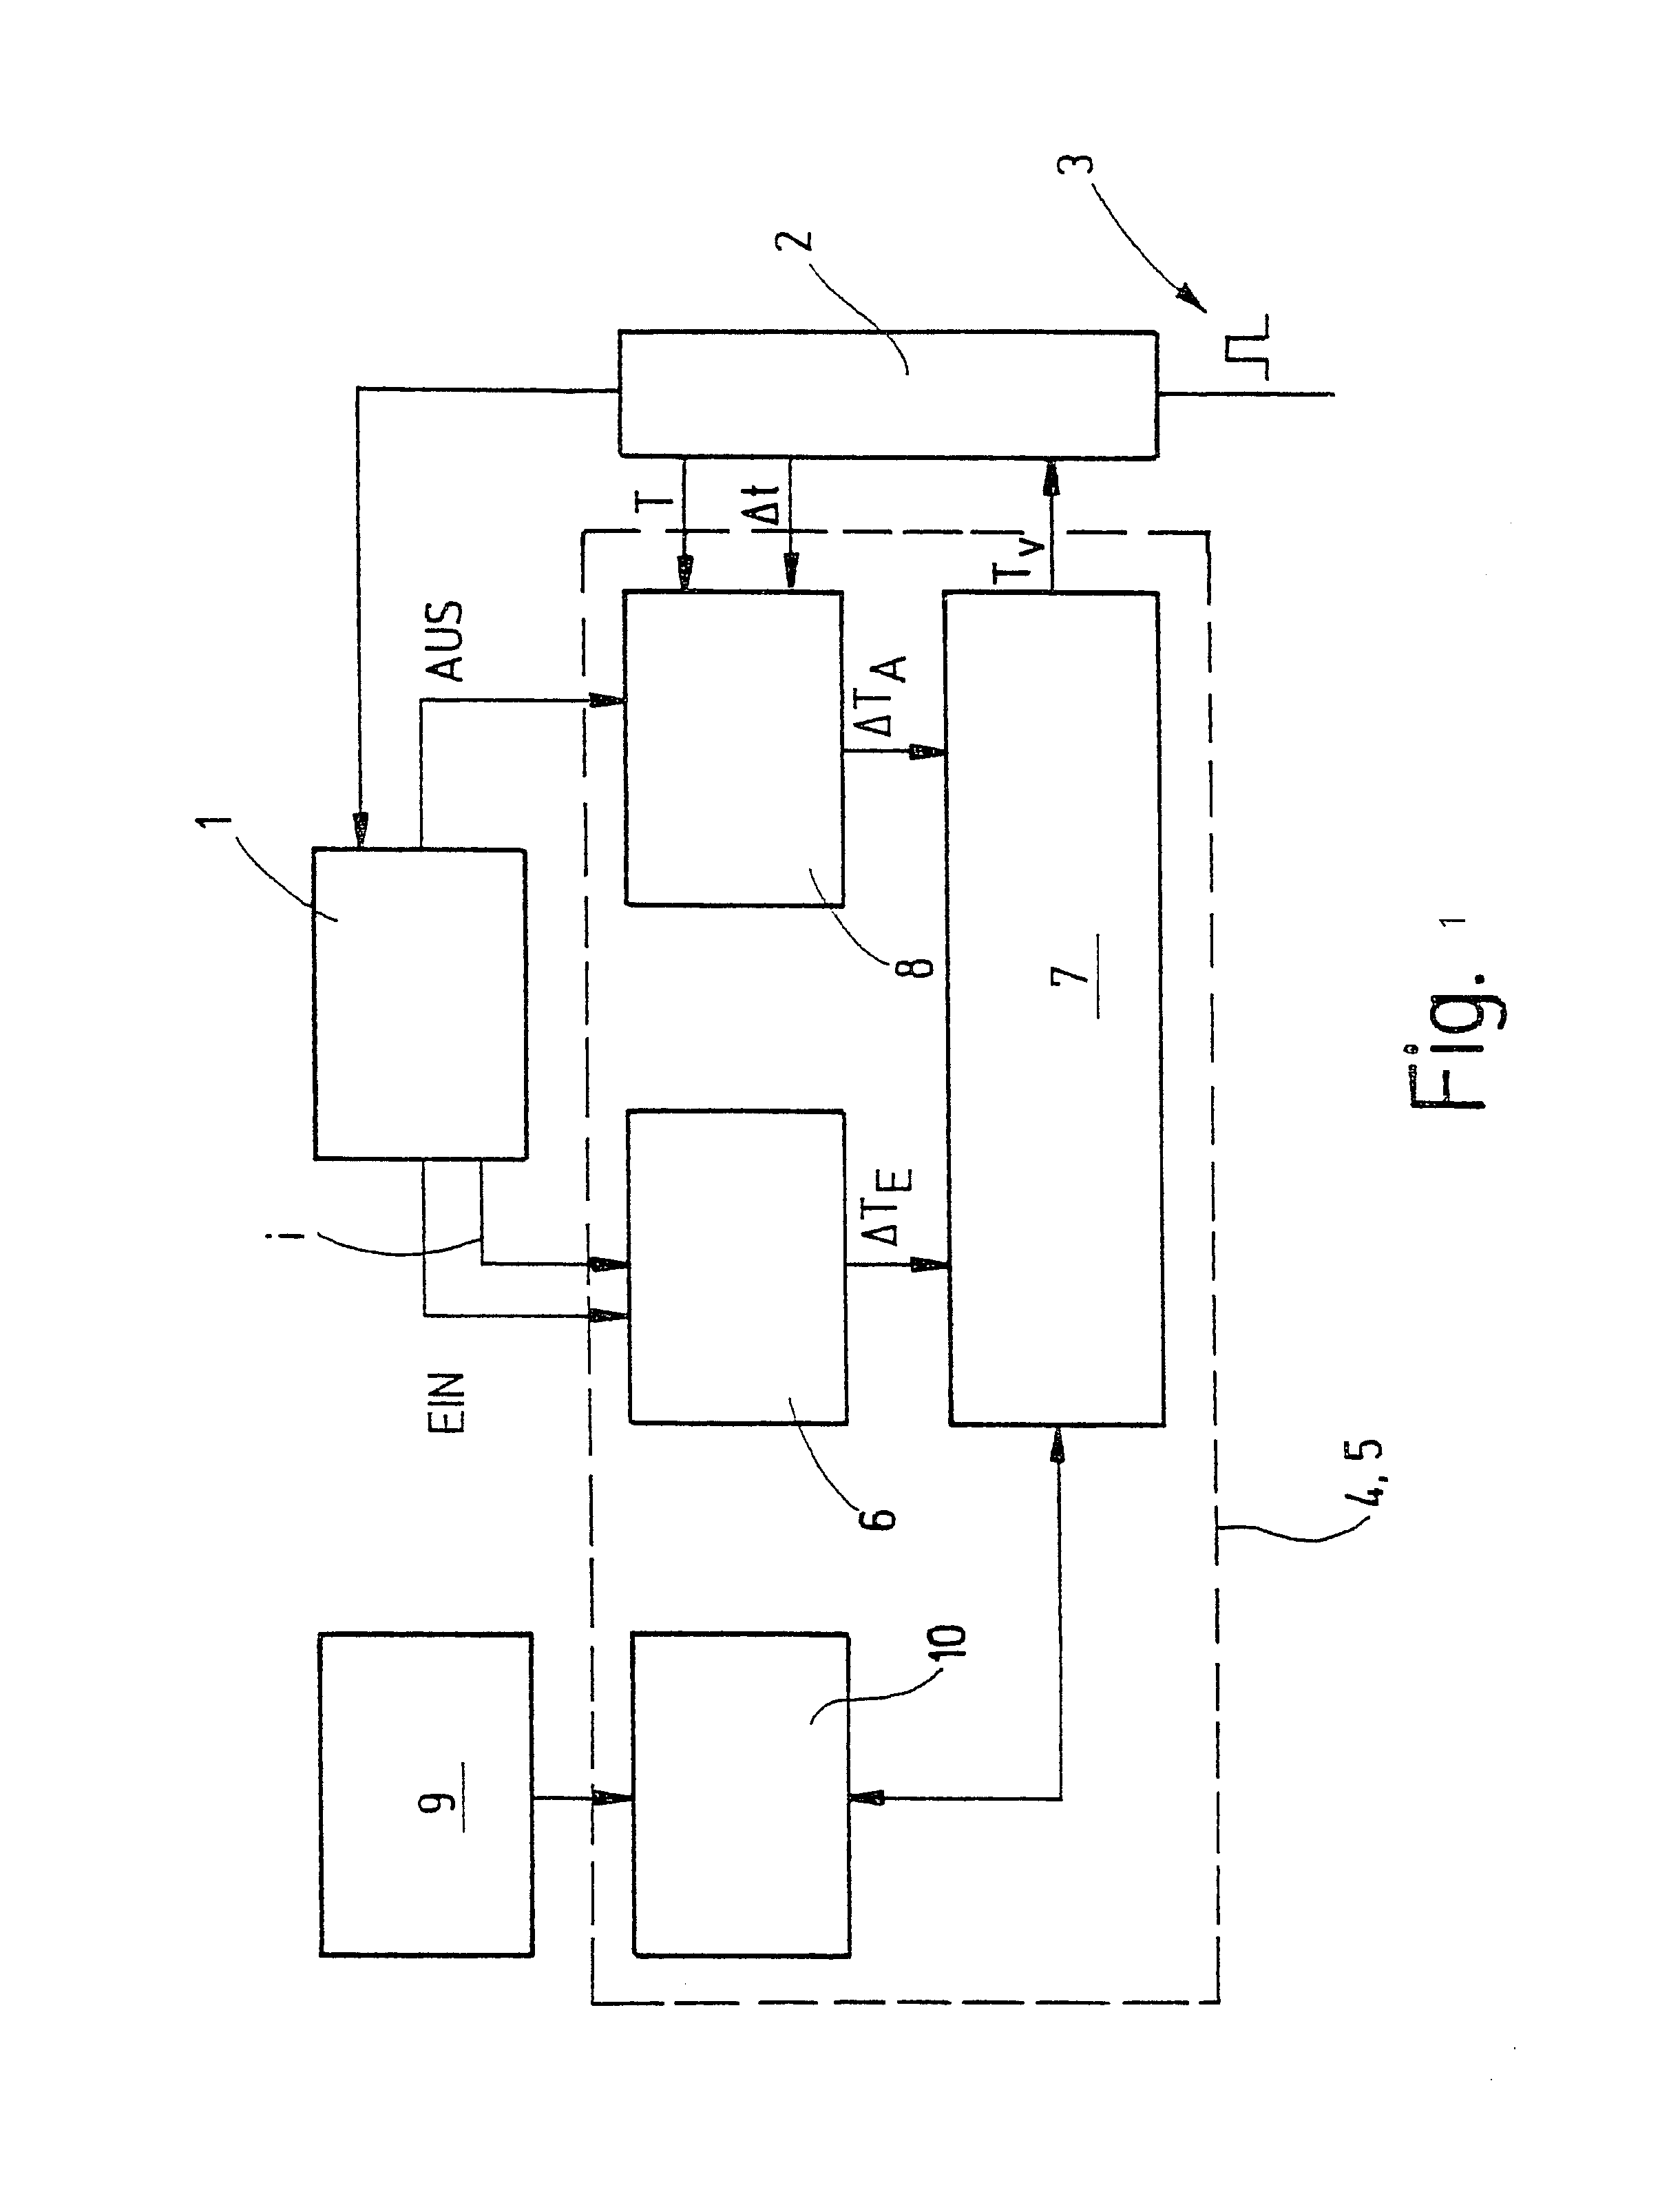 Electric starter device for an internal combustion engine